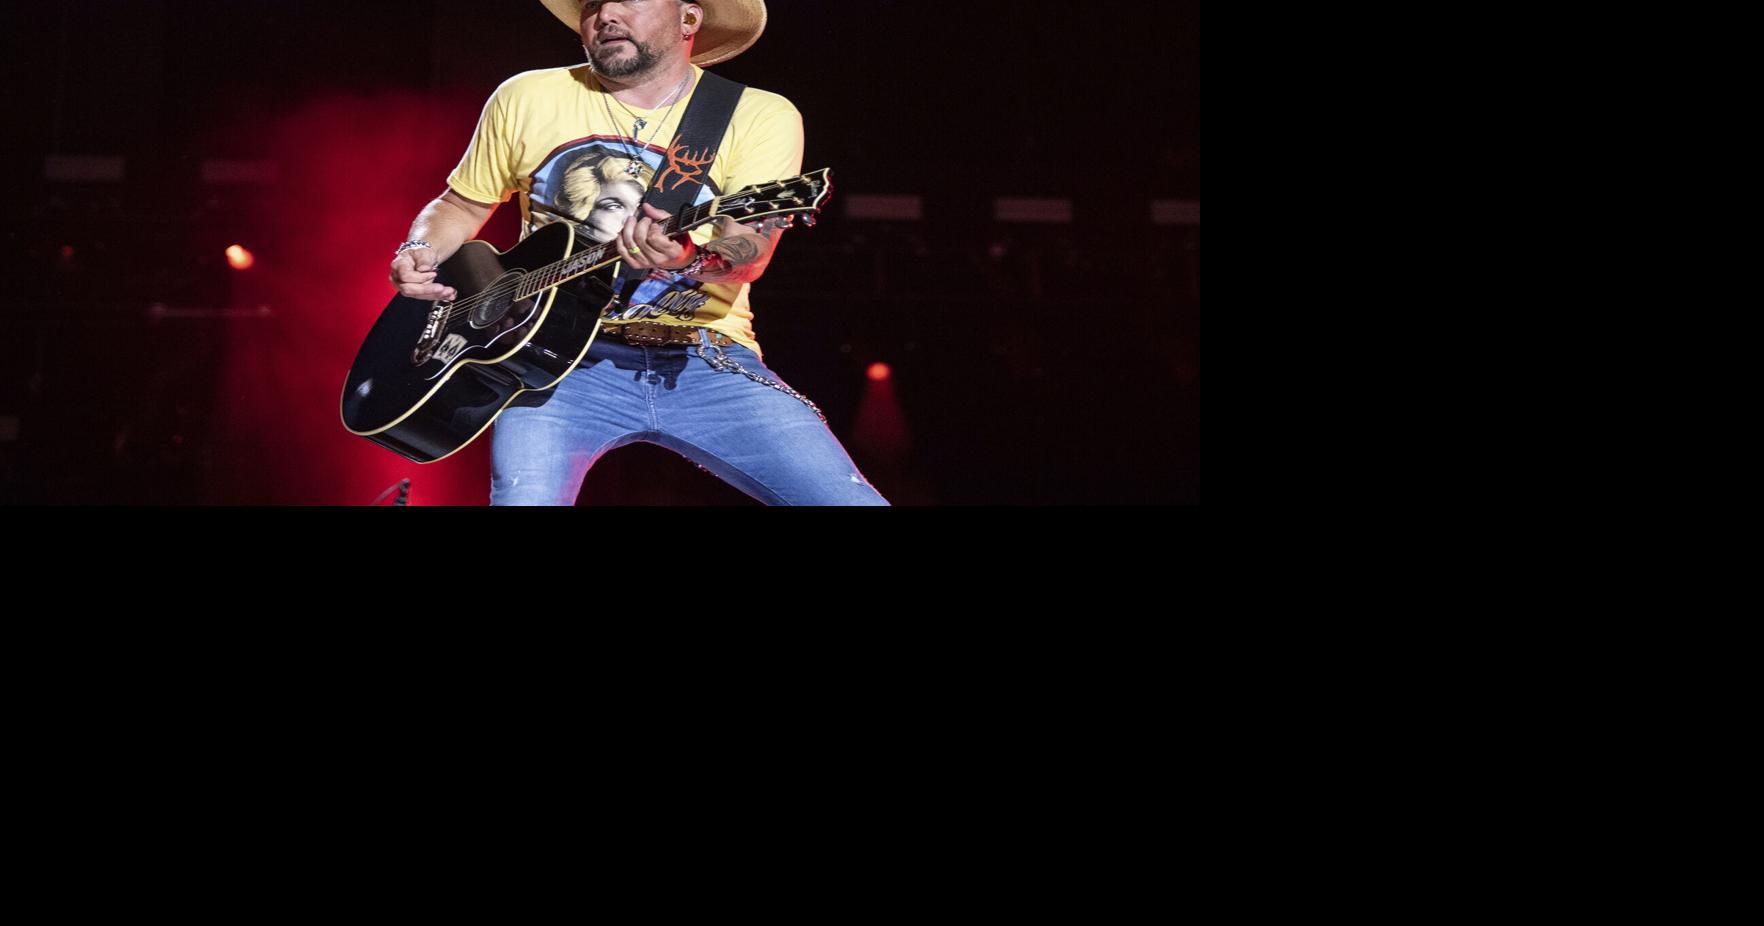 CMT pulls video for Jason Aldean's controversial song, Trump target of  investigation of 2020 election overturn efforts, and more of the week's news